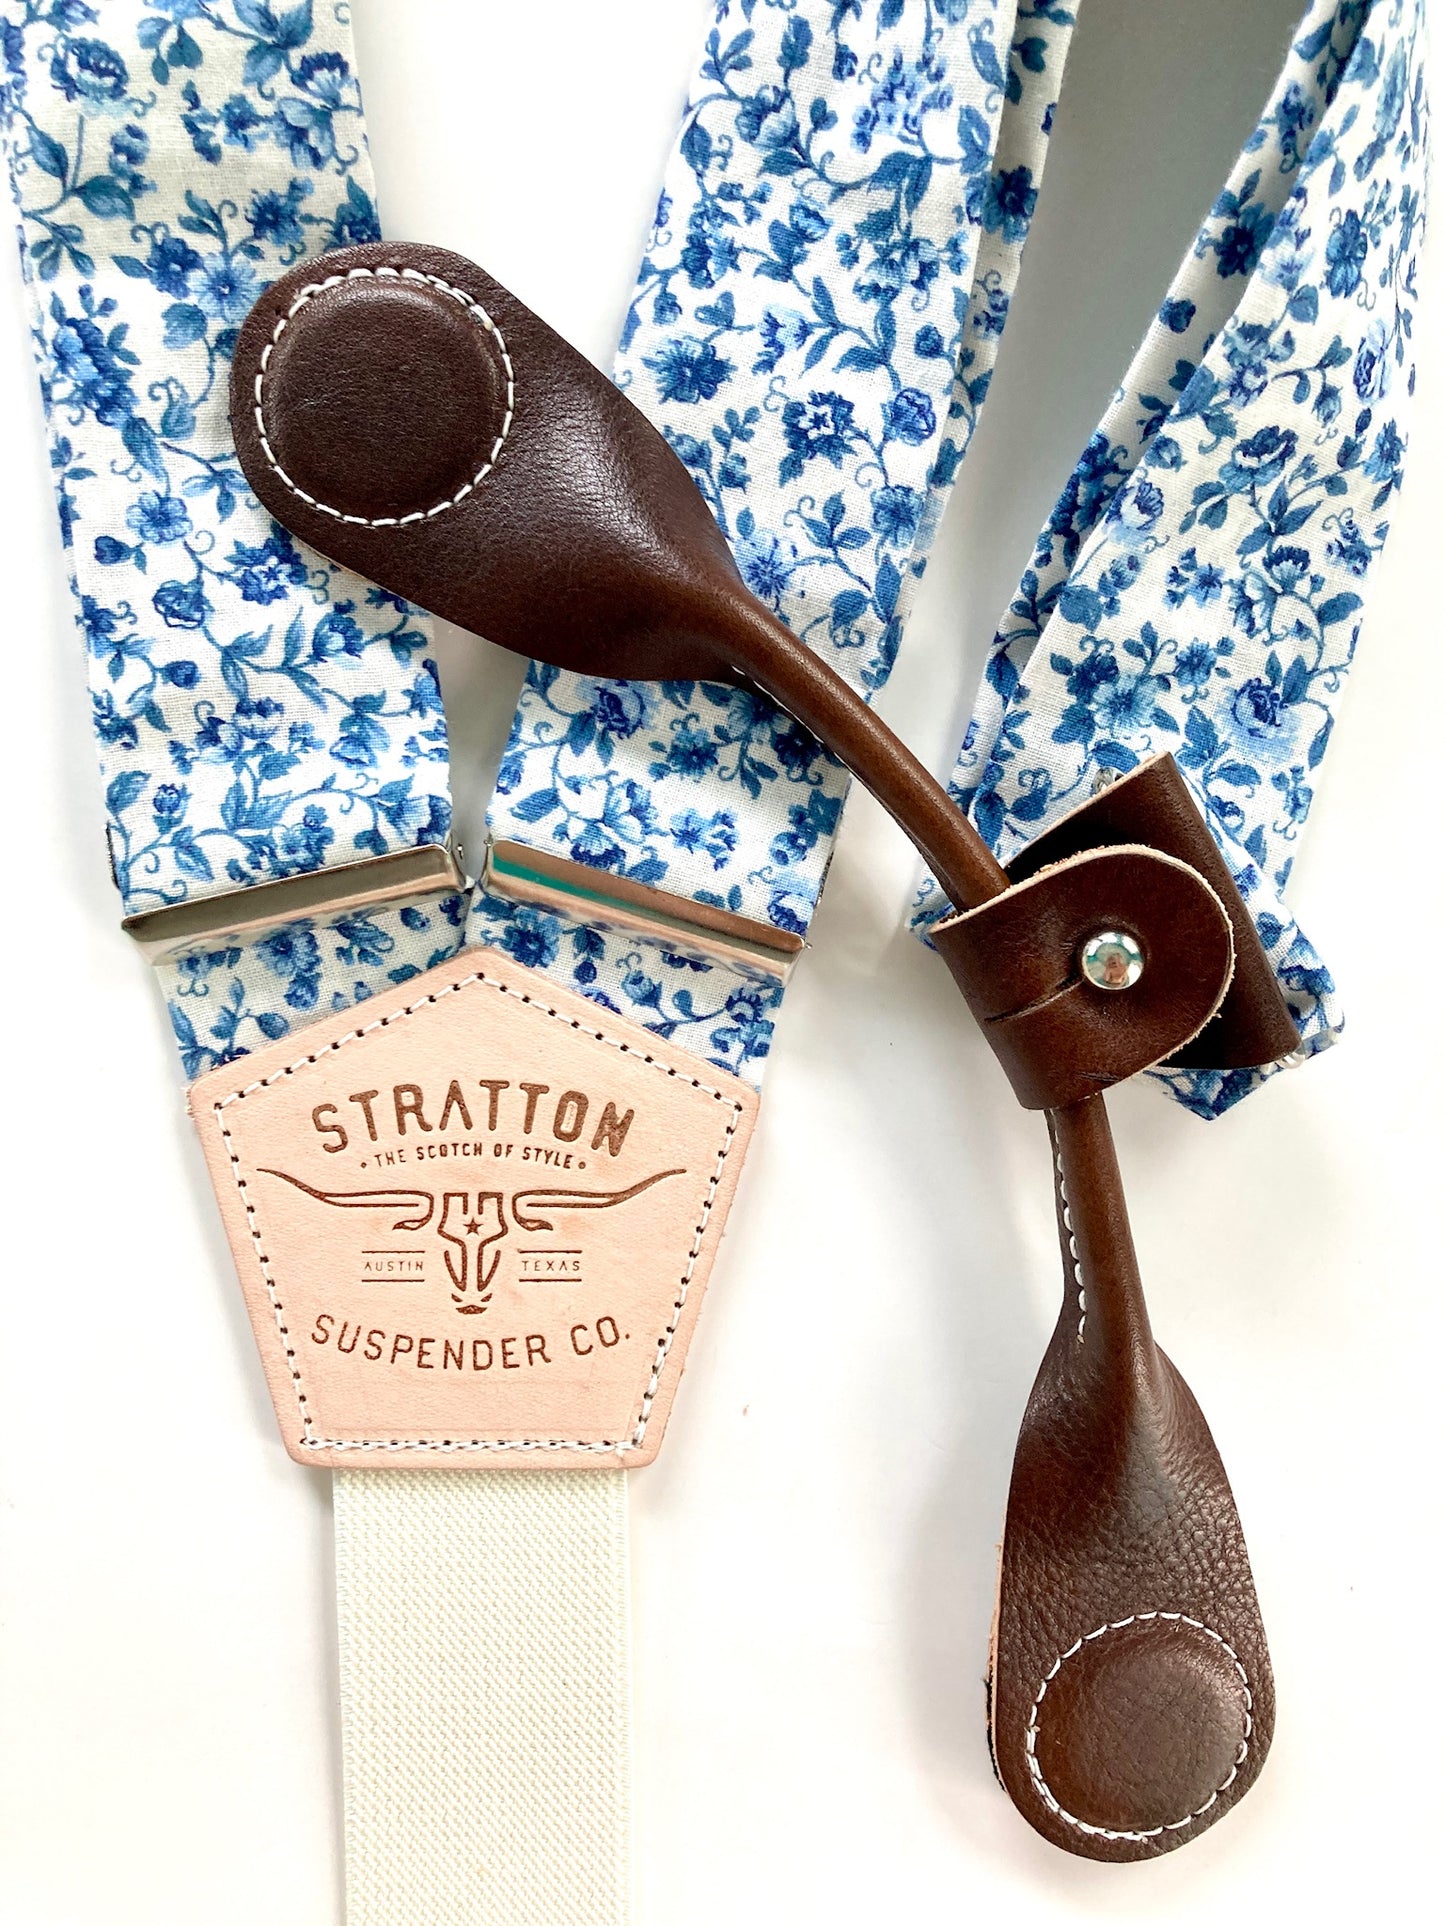 Stratton Suspenders in Blue Summertime Floral Paired with Chocolate Pontedero Leather Magnetic 